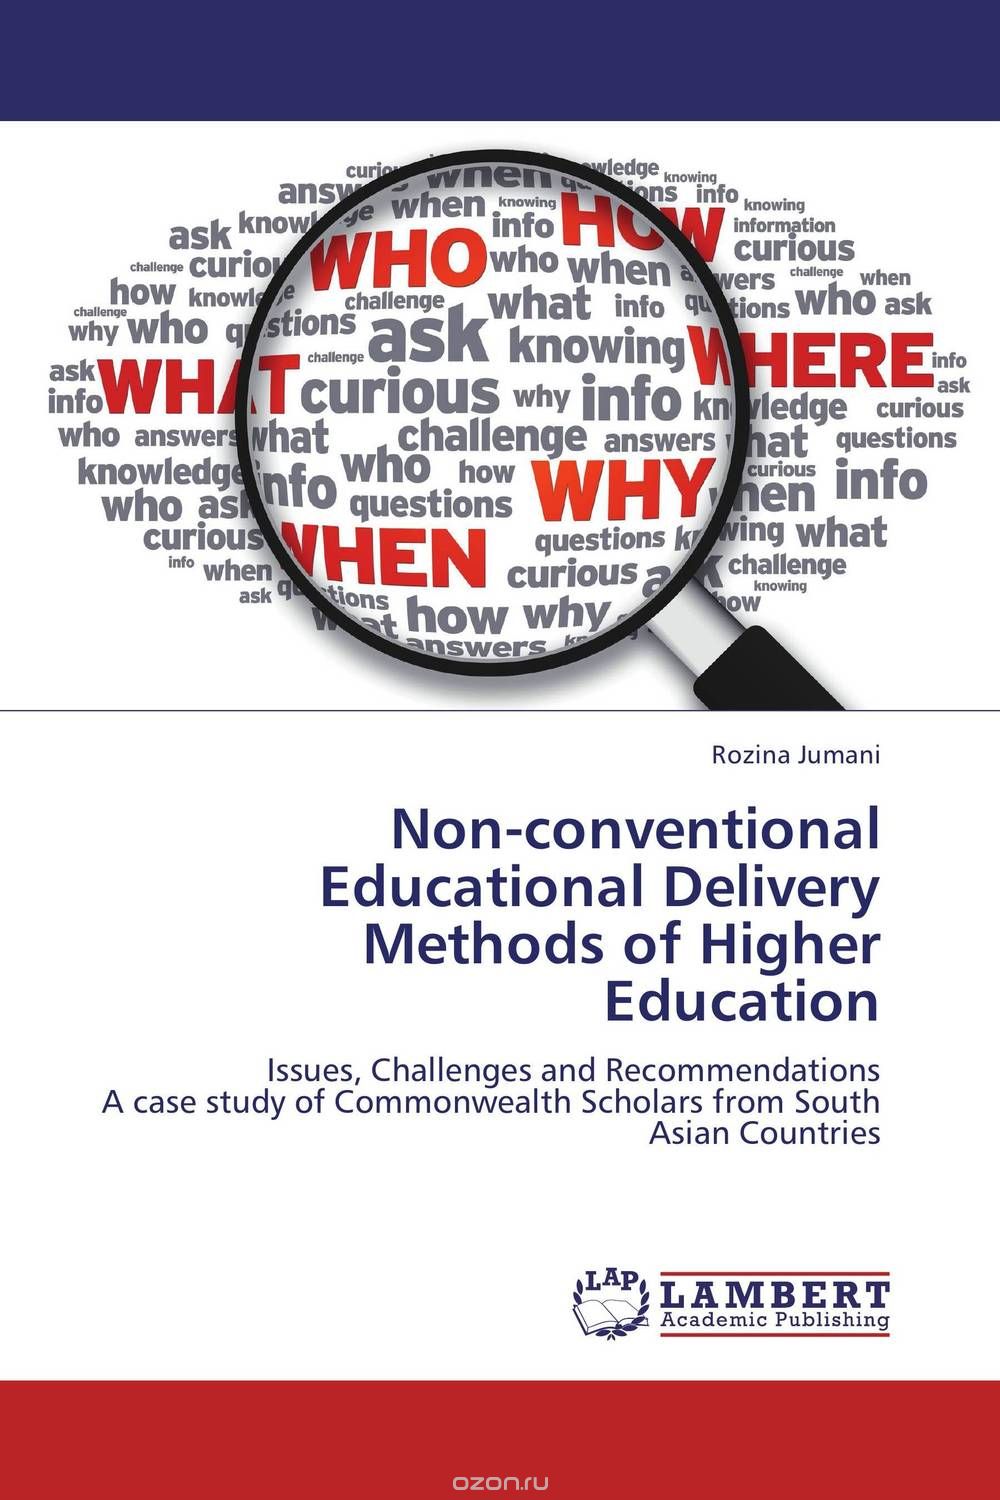 Non-conventional Educational Delivery Methods of Higher Education